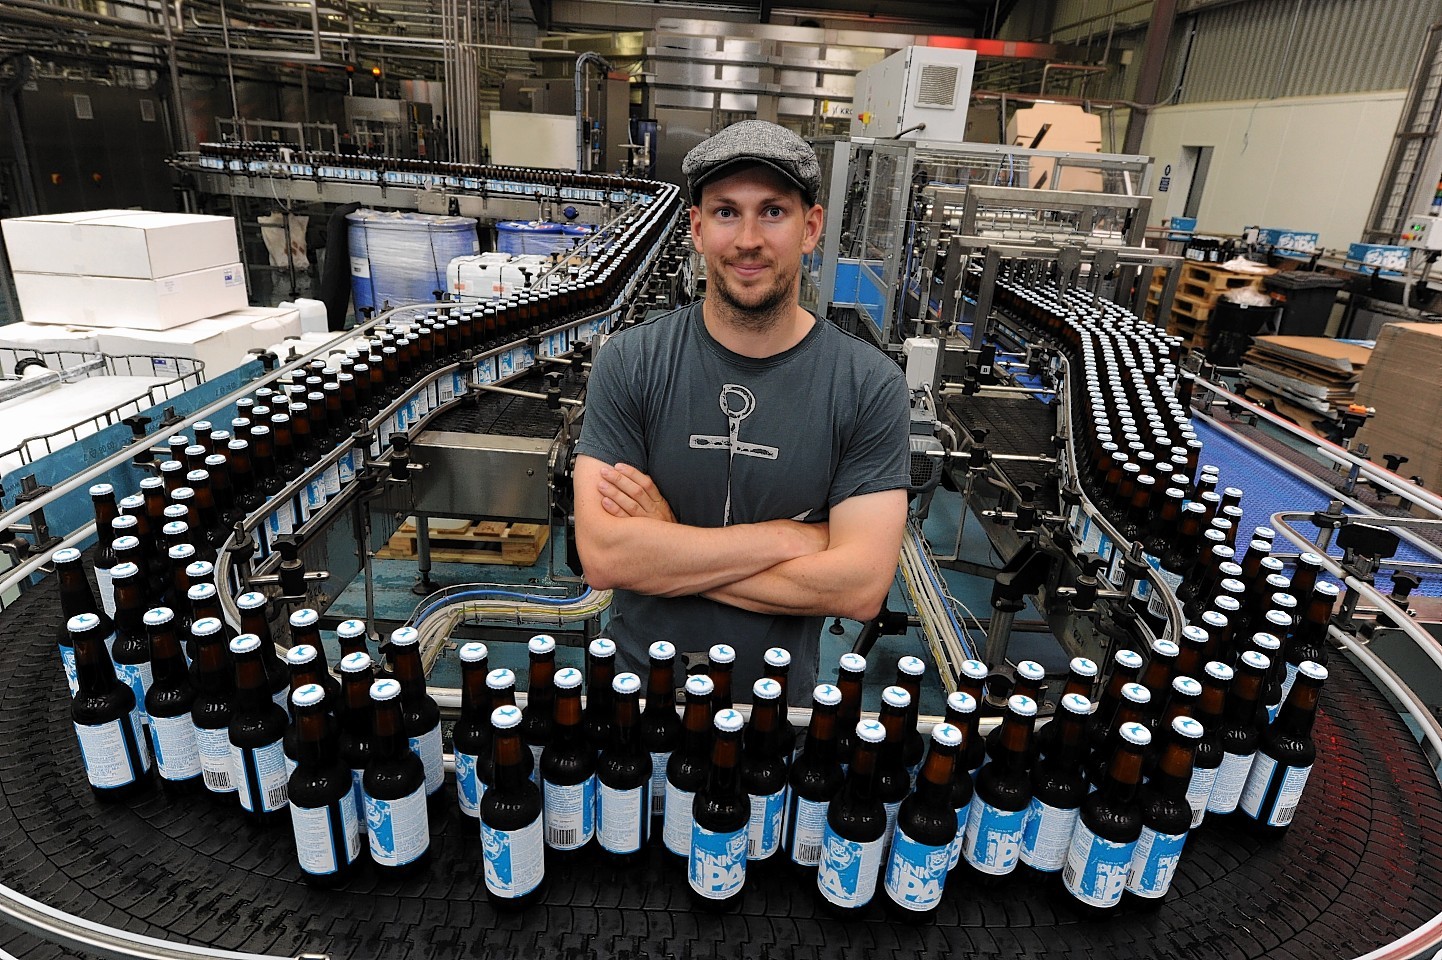 Brewdog's chief executive, James Watt, has come under fire in the BBC documentary